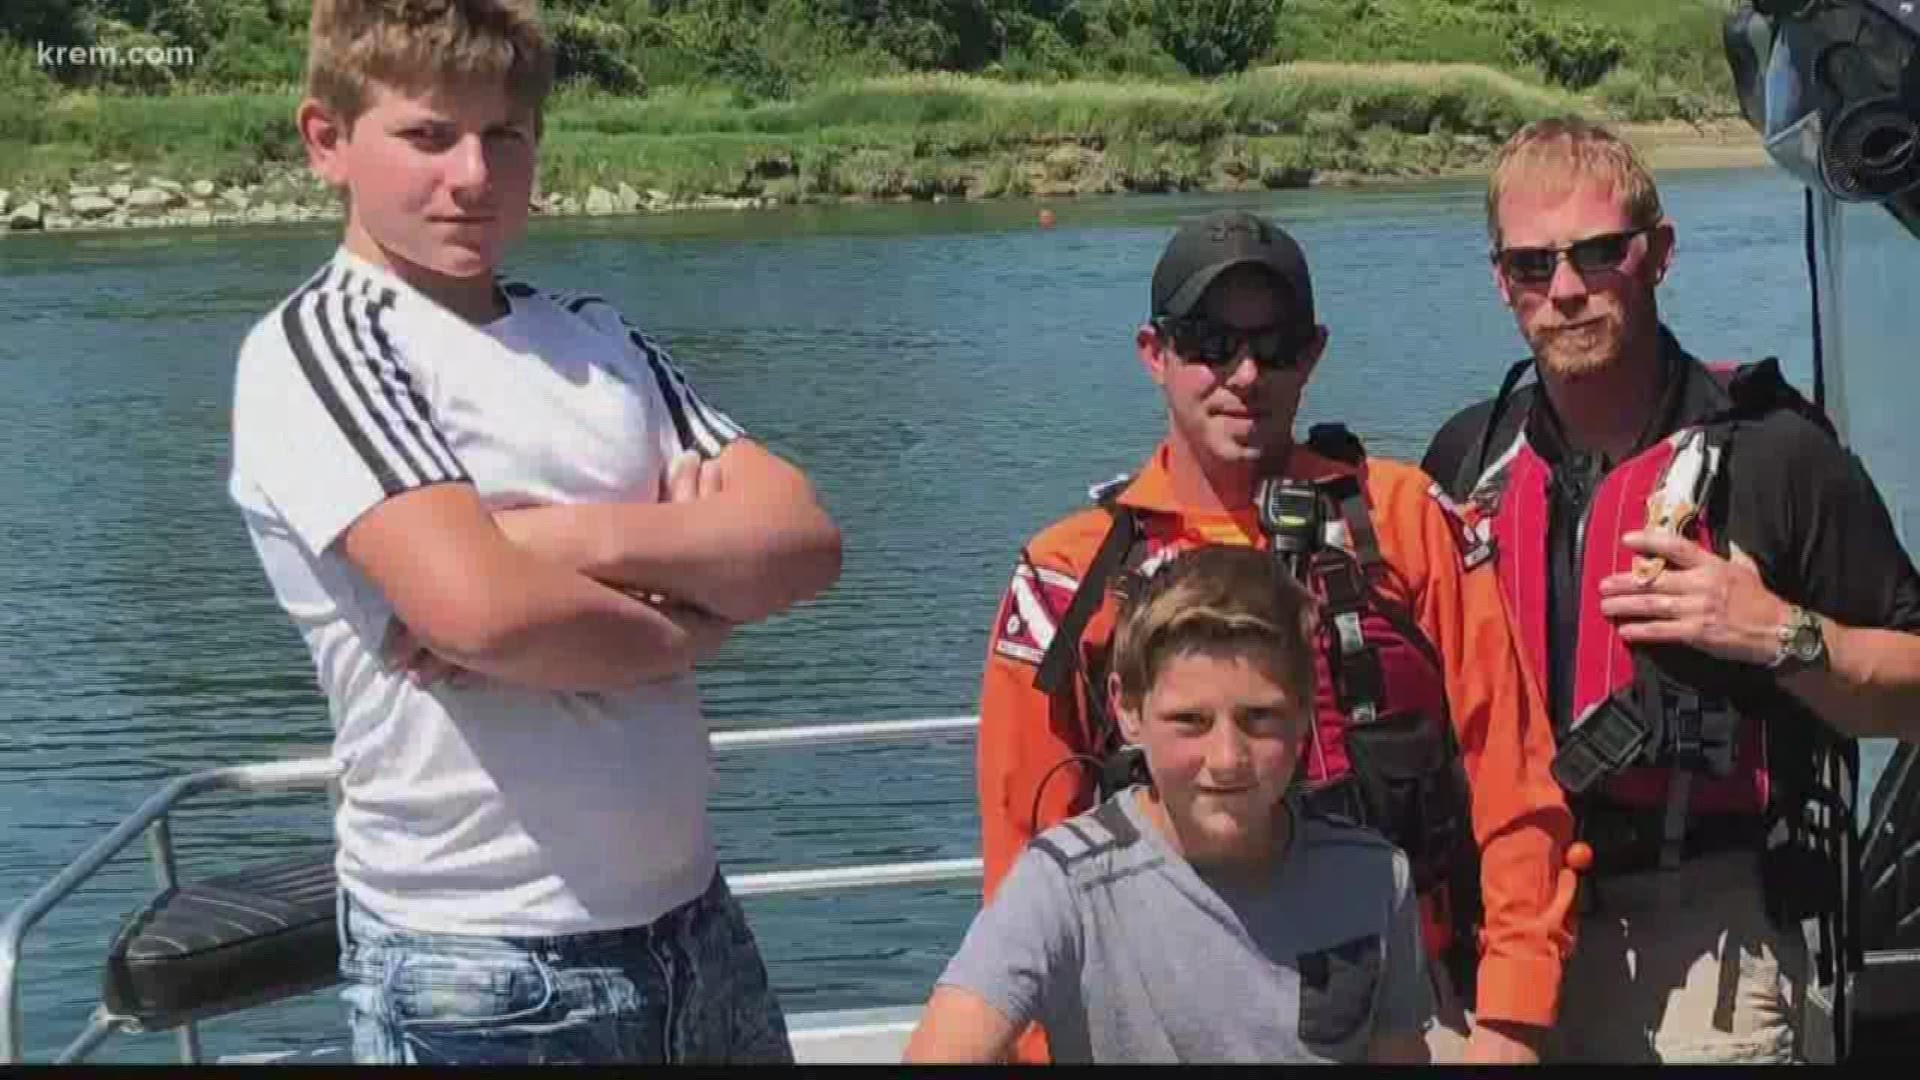 William Johnson, 14, and Brennan Johnson, 11, were made honorary members of Boundary County's search and rescue squad after saving the life of a 9-year-old boy.